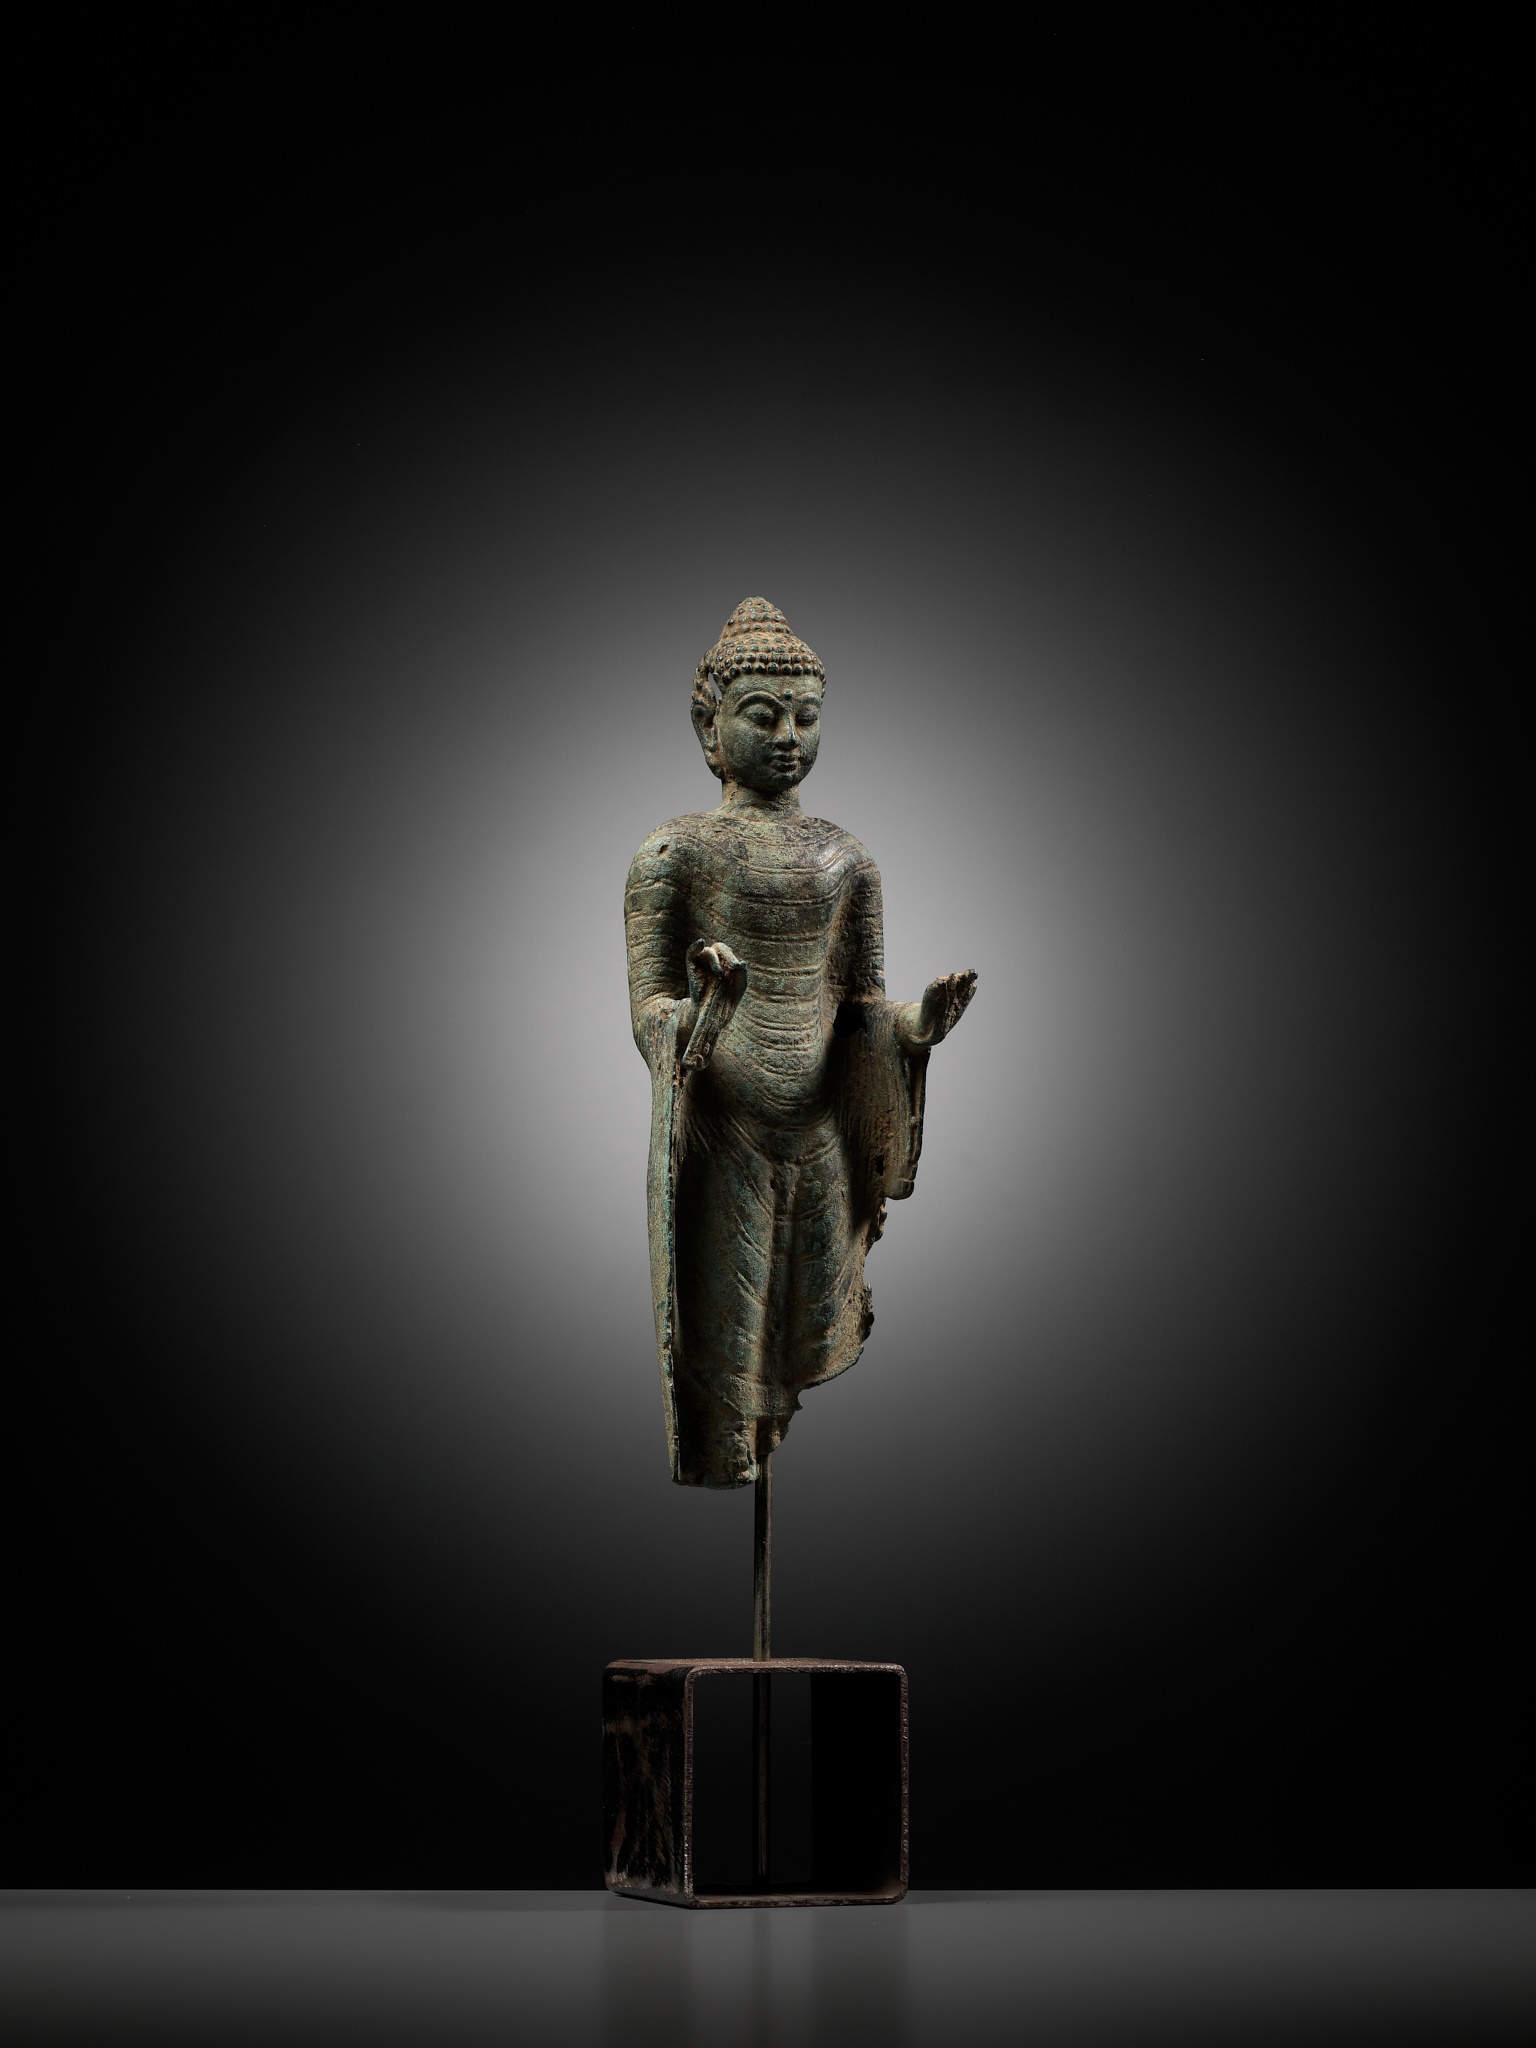 A FRAGMENTARY BRONZE BUST OF BUDDHA, INDONESIA, 16TH-17TH CENTURY - Image 9 of 9